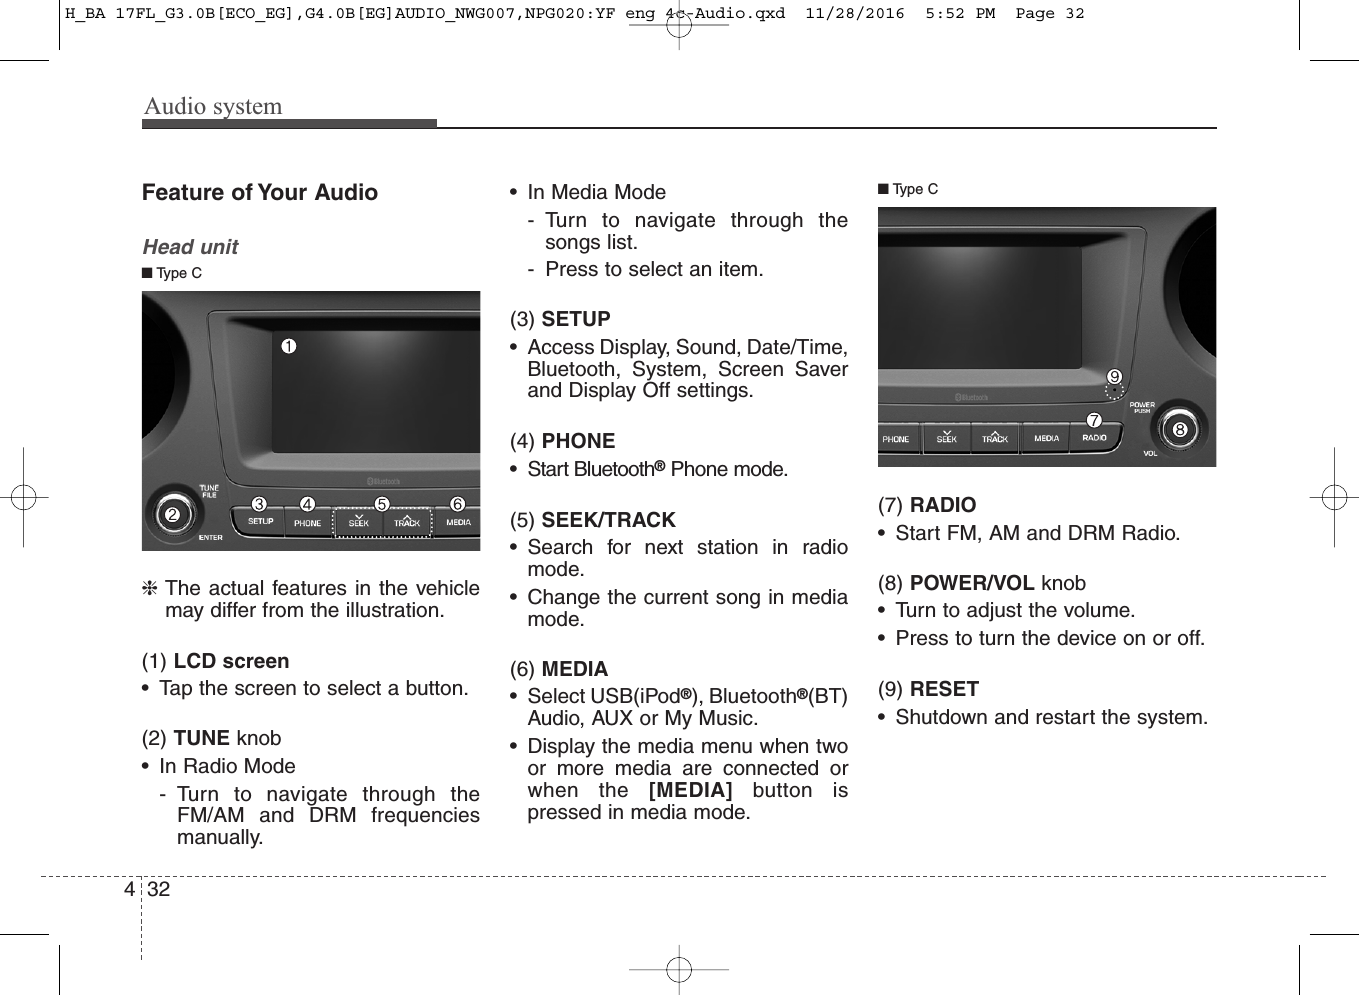 Audio system324Feature of Your AudioHead unit❈The actual features in the vehiclemay differ from the illustration.(1) LCD screen• Tap the screen to select a button.(2) TUNE knob • In Radio Mode- Turn to navigate through theFM/AM and DRM frequenciesmanually.• In Media Mode- Turn to navigate through thesongs list.- Press to select an item.(3) SETUP• Access Display, Sound, Date/Time,Bluetooth, System, Screen Saverand Display Off settings.(4) PHONE• Start Bluetooth®Phone mode.(5) SEEK/TRACK• Search for next station in radiomode.• Change the current song in mediamode.(6) MEDIA• Select USB(iPod®), Bluetooth®(BT)Audio, AUX or My Music.• Display the media menu when twoor more media are connected orwhen the [MEDIA] button ispressed in media mode. (7) RADIO• Start FM, AM and DRM Radio.(8) POWER/VOL knob • Turn to adjust the volume.• Press to turn the device on or off.(9) RESET• Shutdown and restart the system.■Type C■Type CH_BA 17FL_G3.0B[ECO_EG],G4.0B[EG]AUDIO_NWG007,NPG020:YF eng 4c-Audio.qxd  11/28/2016  5:52 PM  Page 32